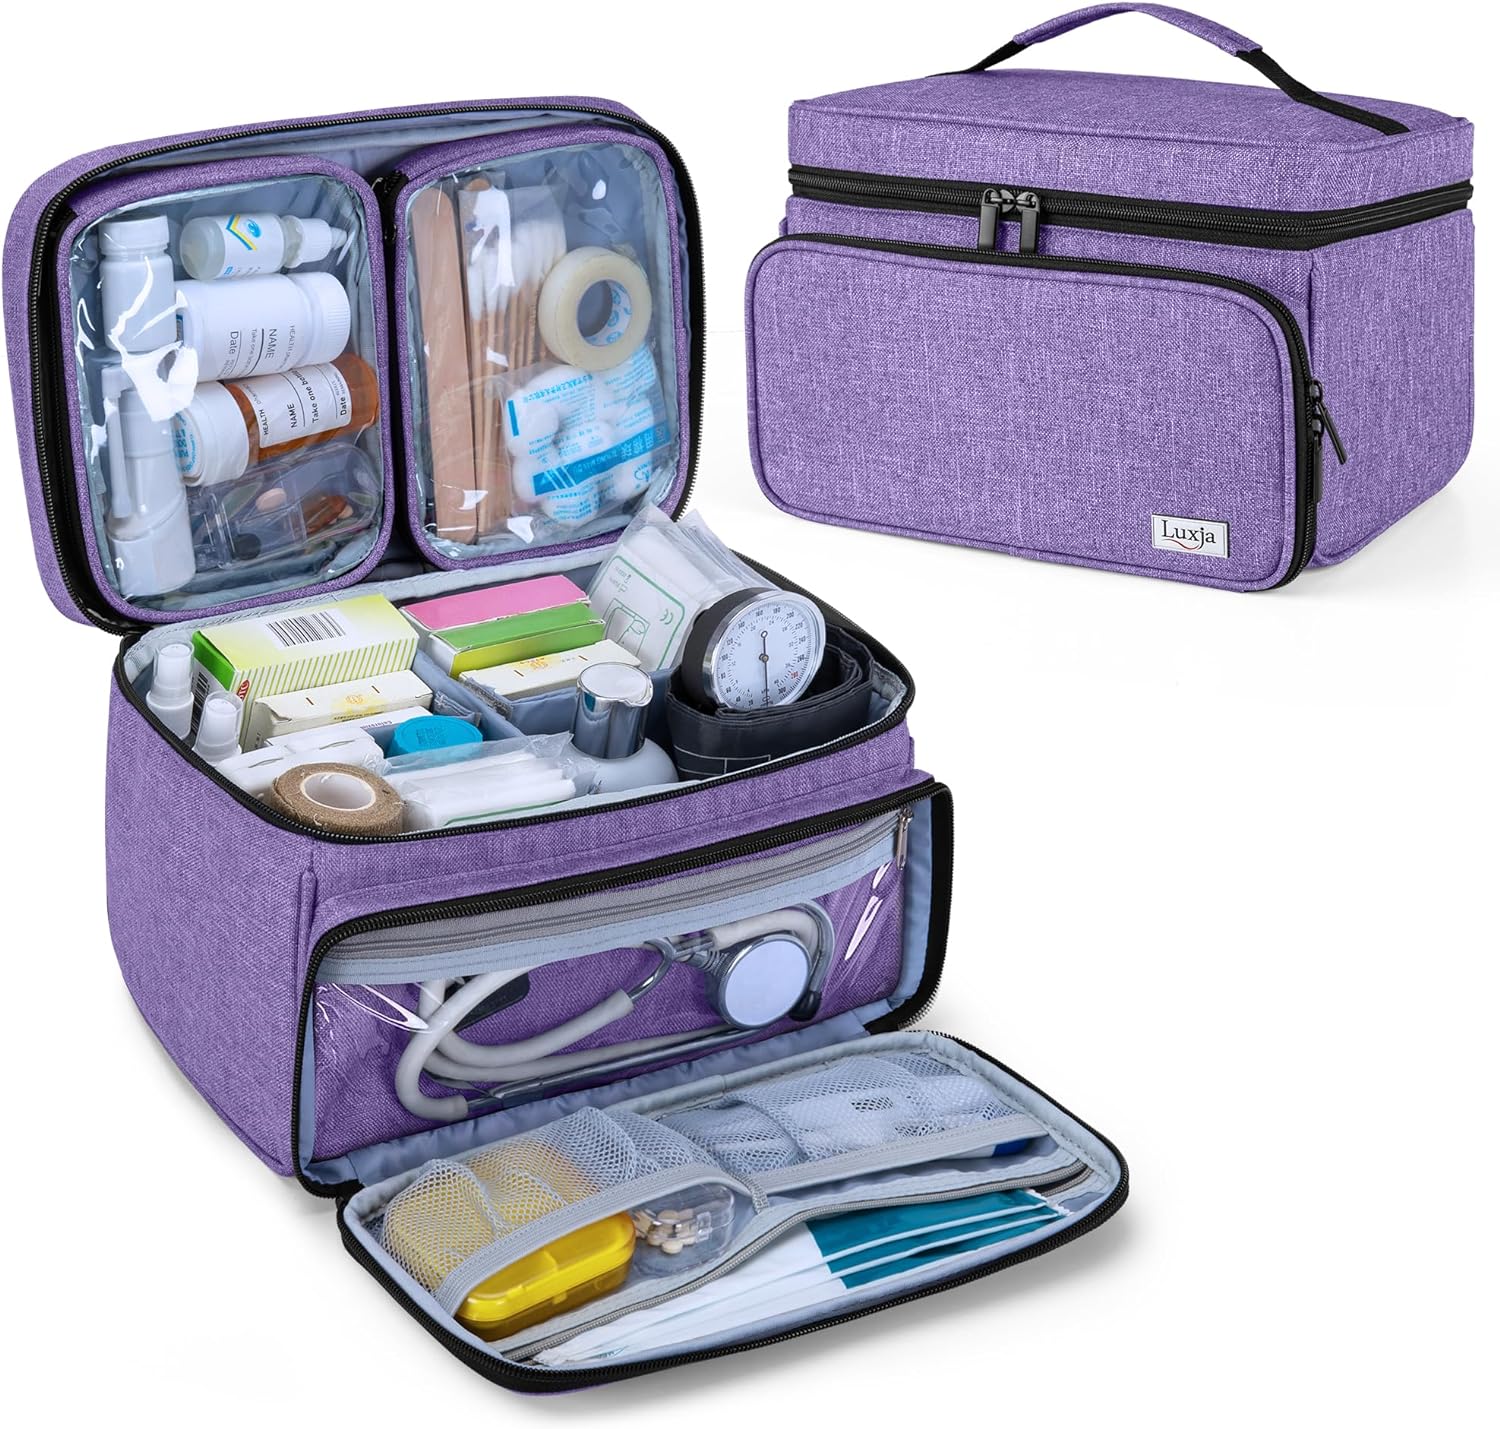 LUXJA Medicine Bag with 2 Detachable Clear Pouches, Pill Bottle Organizer with Detachable Dividers (Suitable for Home or Travel Use), Purple